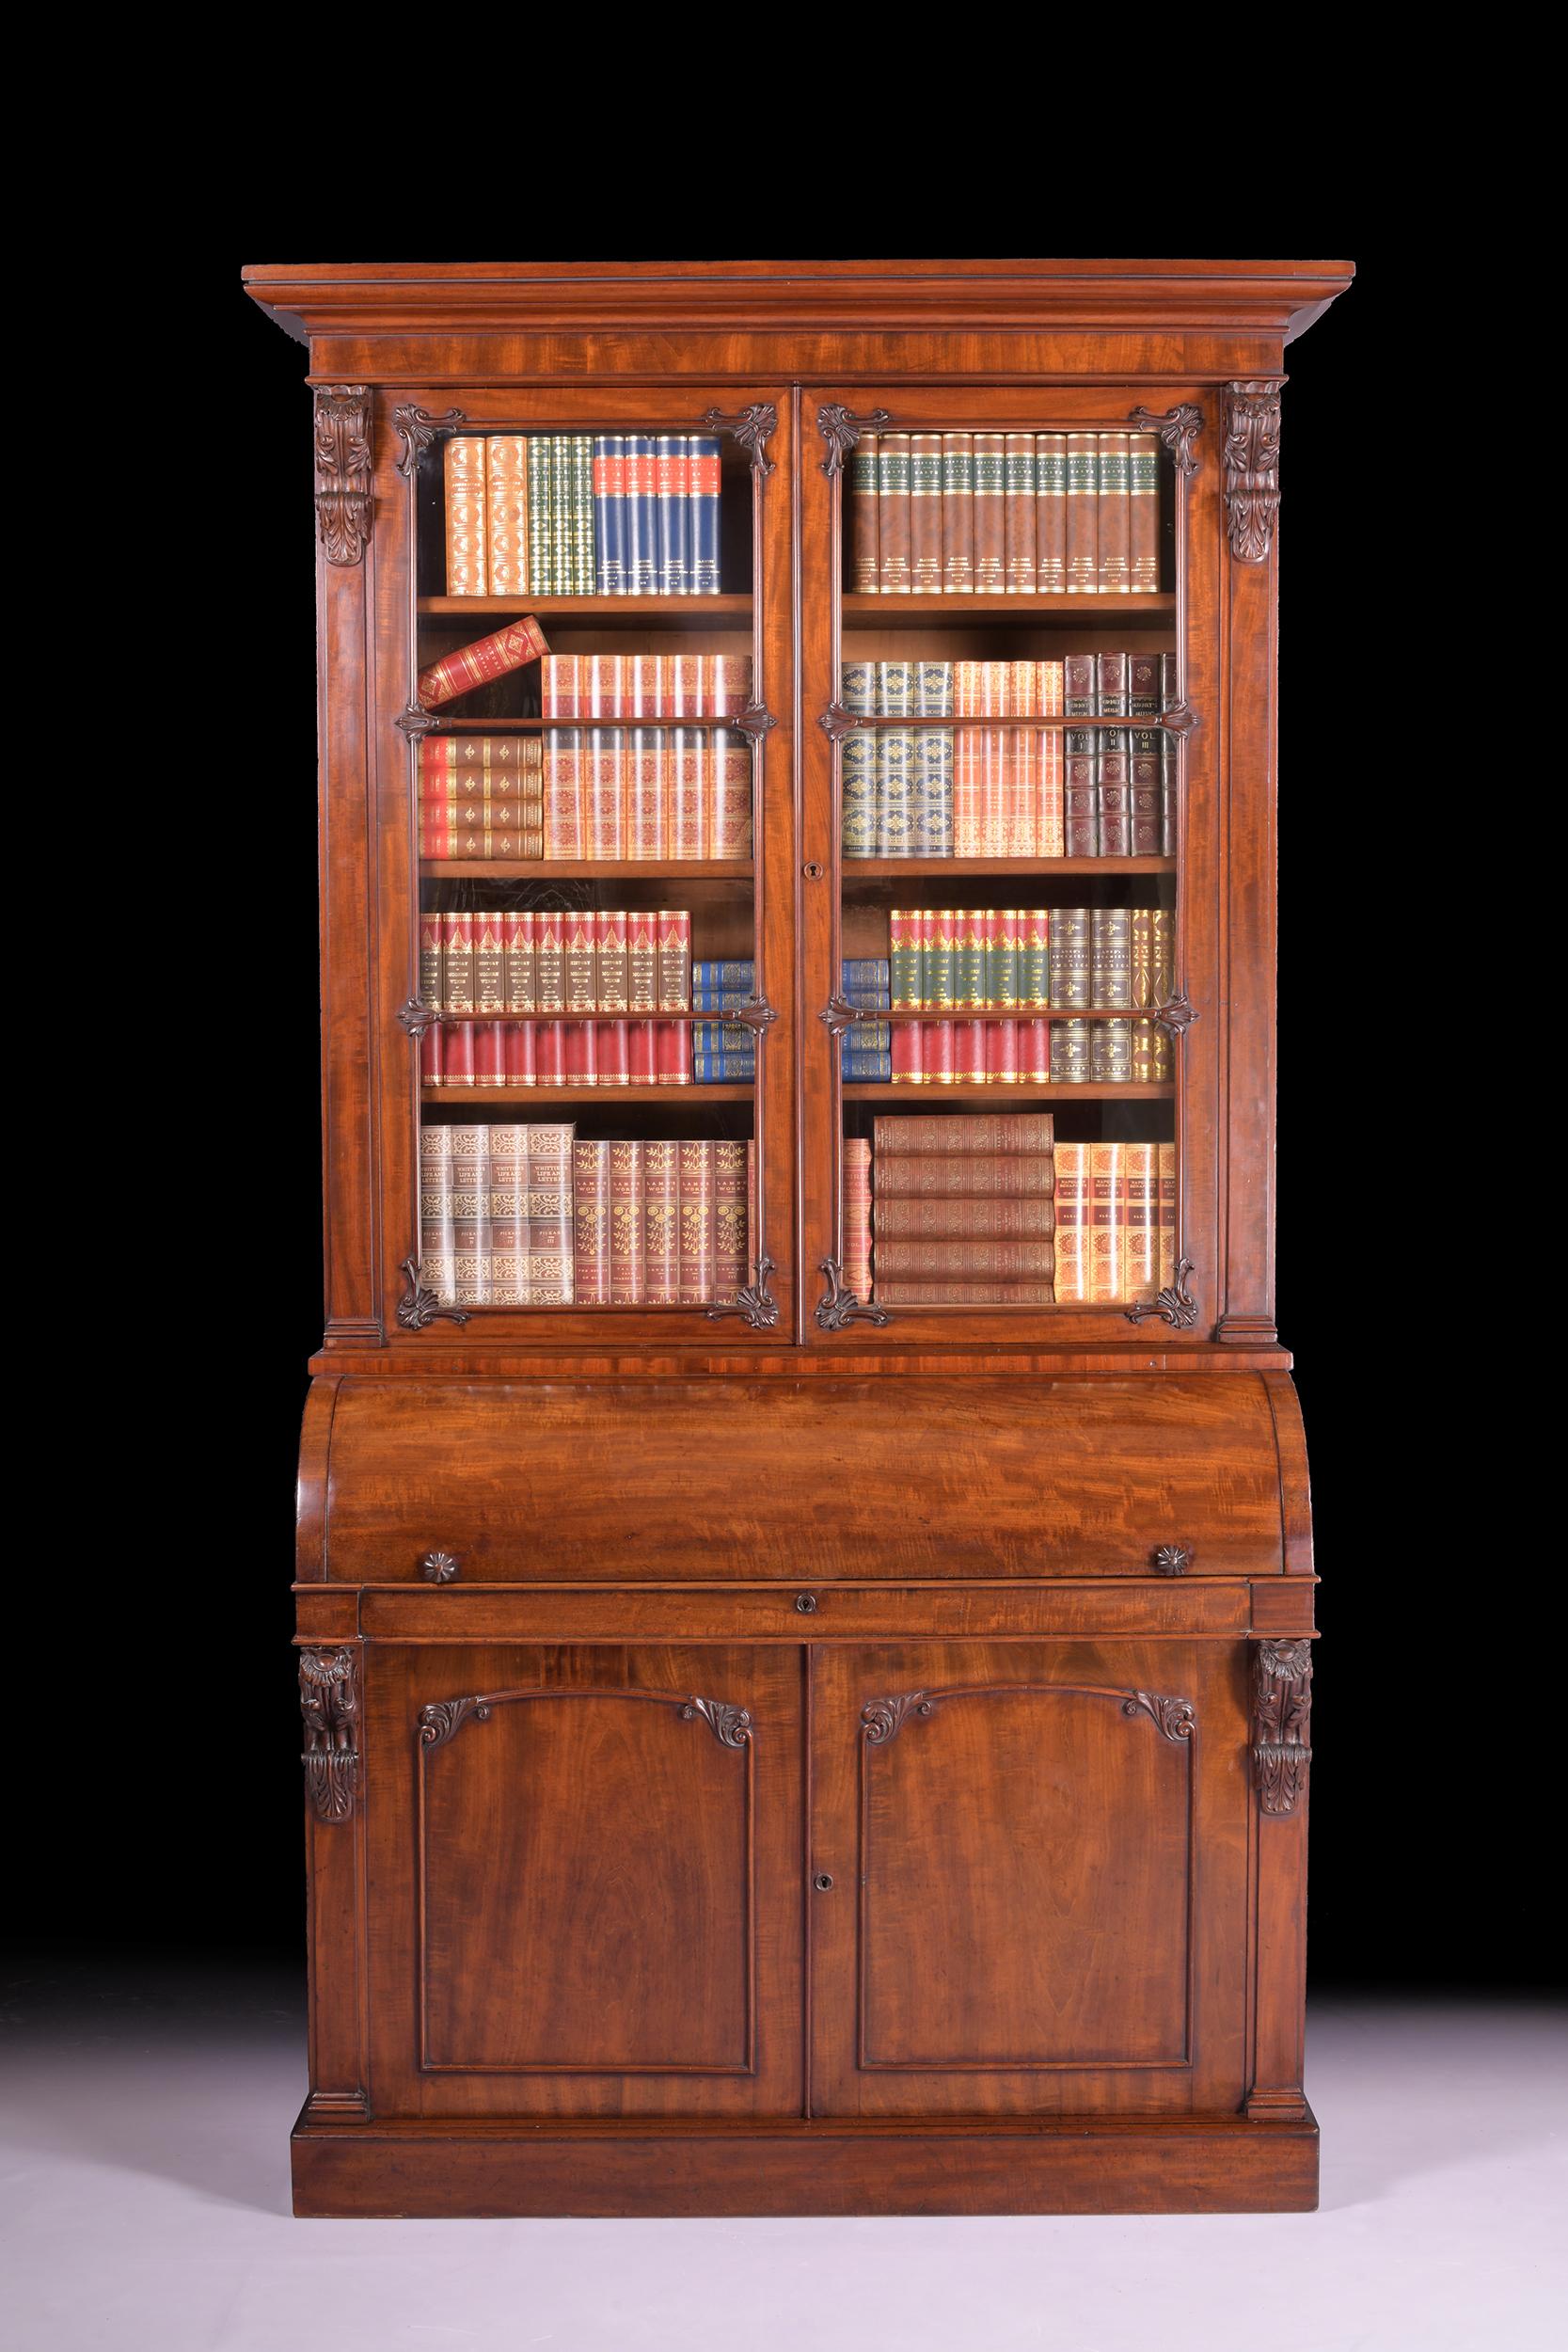 A stunning Irish William IV mahogany secretaire bookcase, the glazed doors enclosing shelves above the cylinder fall enclosing an arrangement of drawers and pigeonholes, and with cupboard doors to the base.

Circa 1835

Irish.